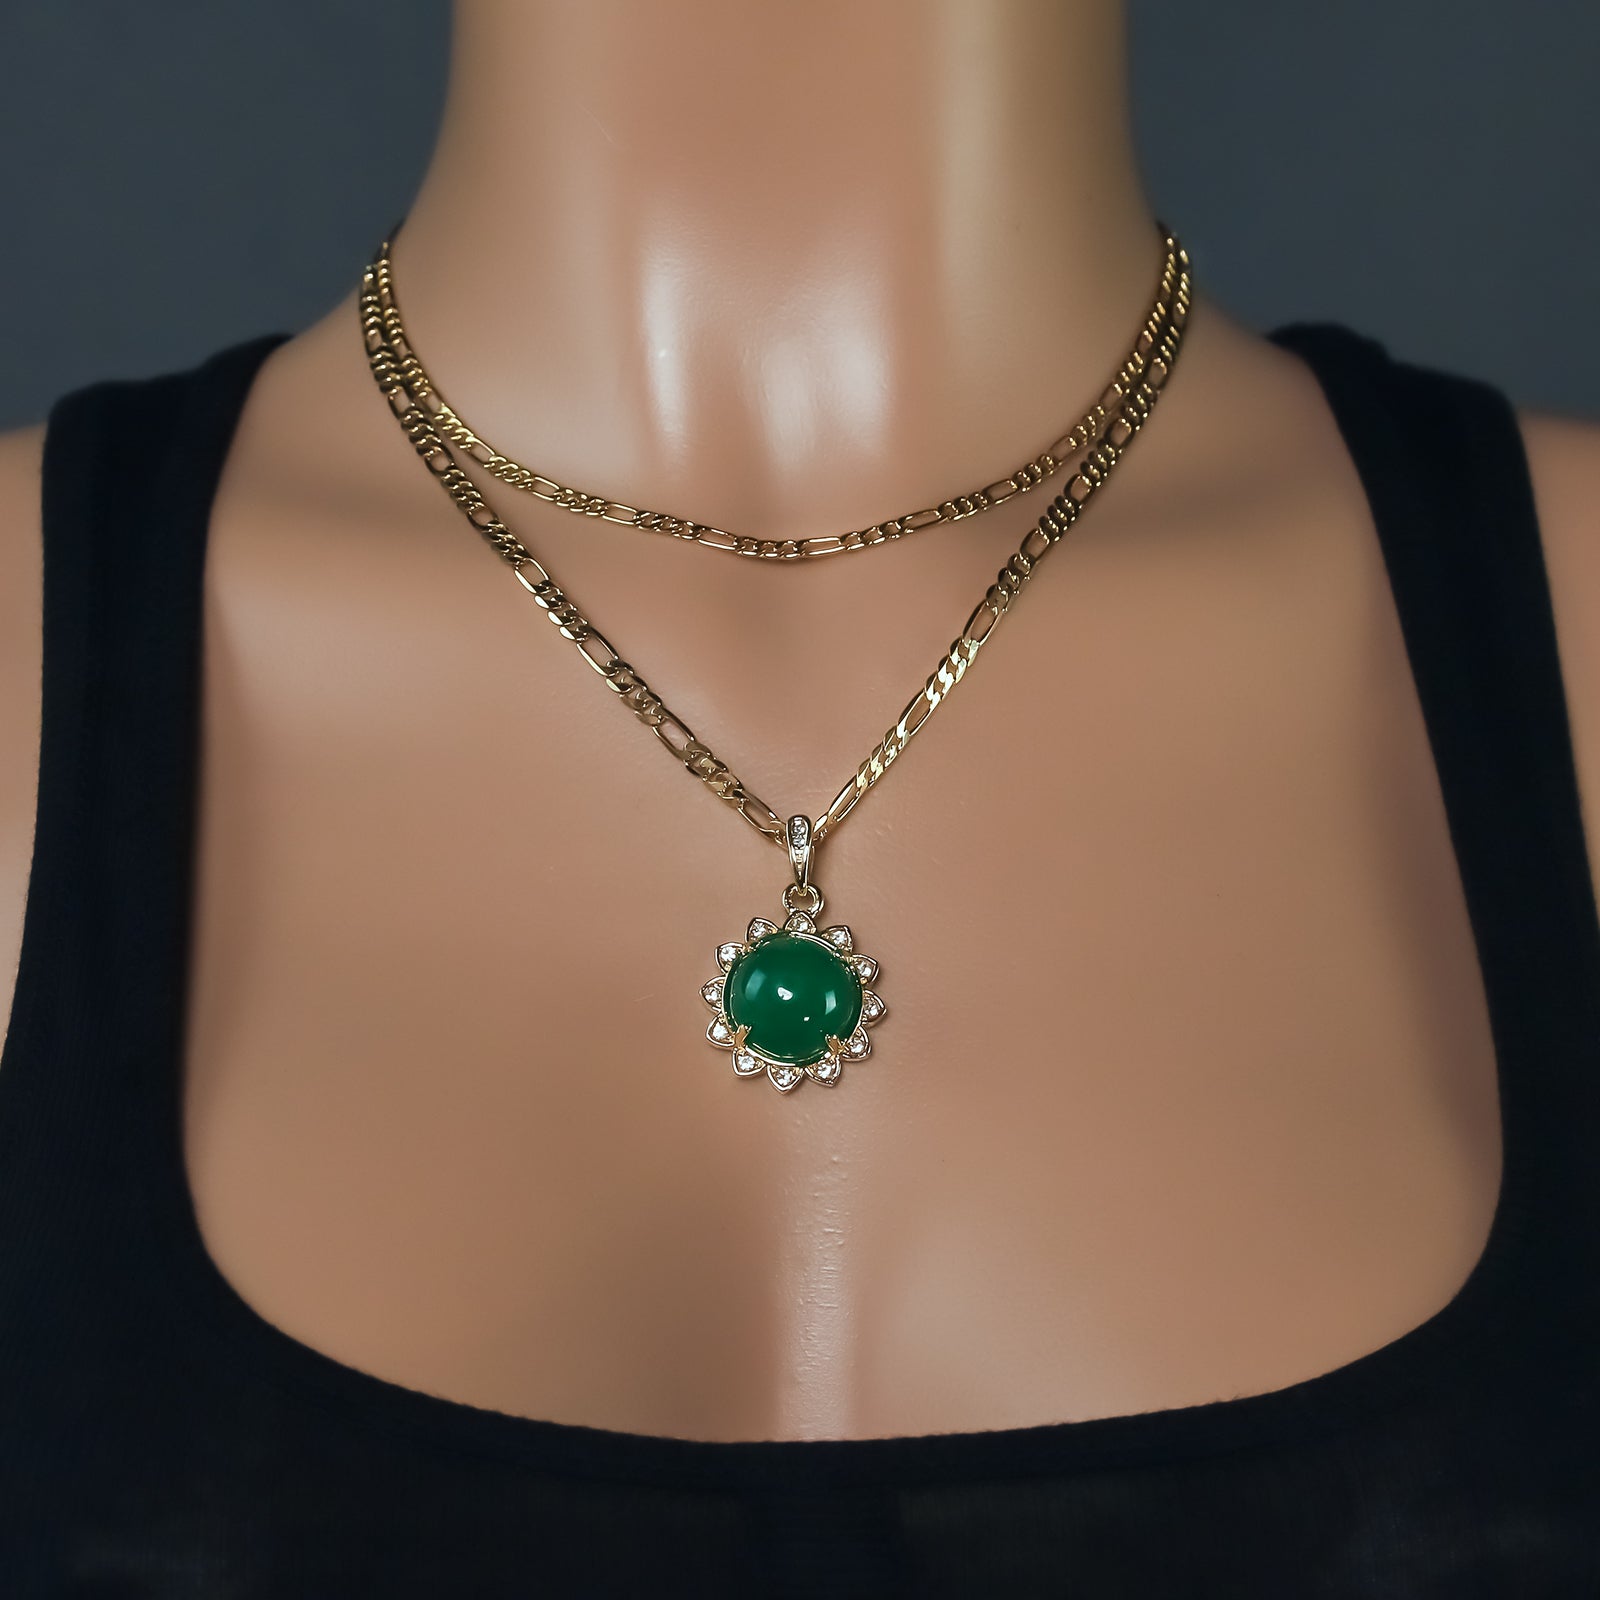 Copy of Exquisite Iced Green Jade Round Shape 14k Gold PT Pendant 18"20" Figaro Chains